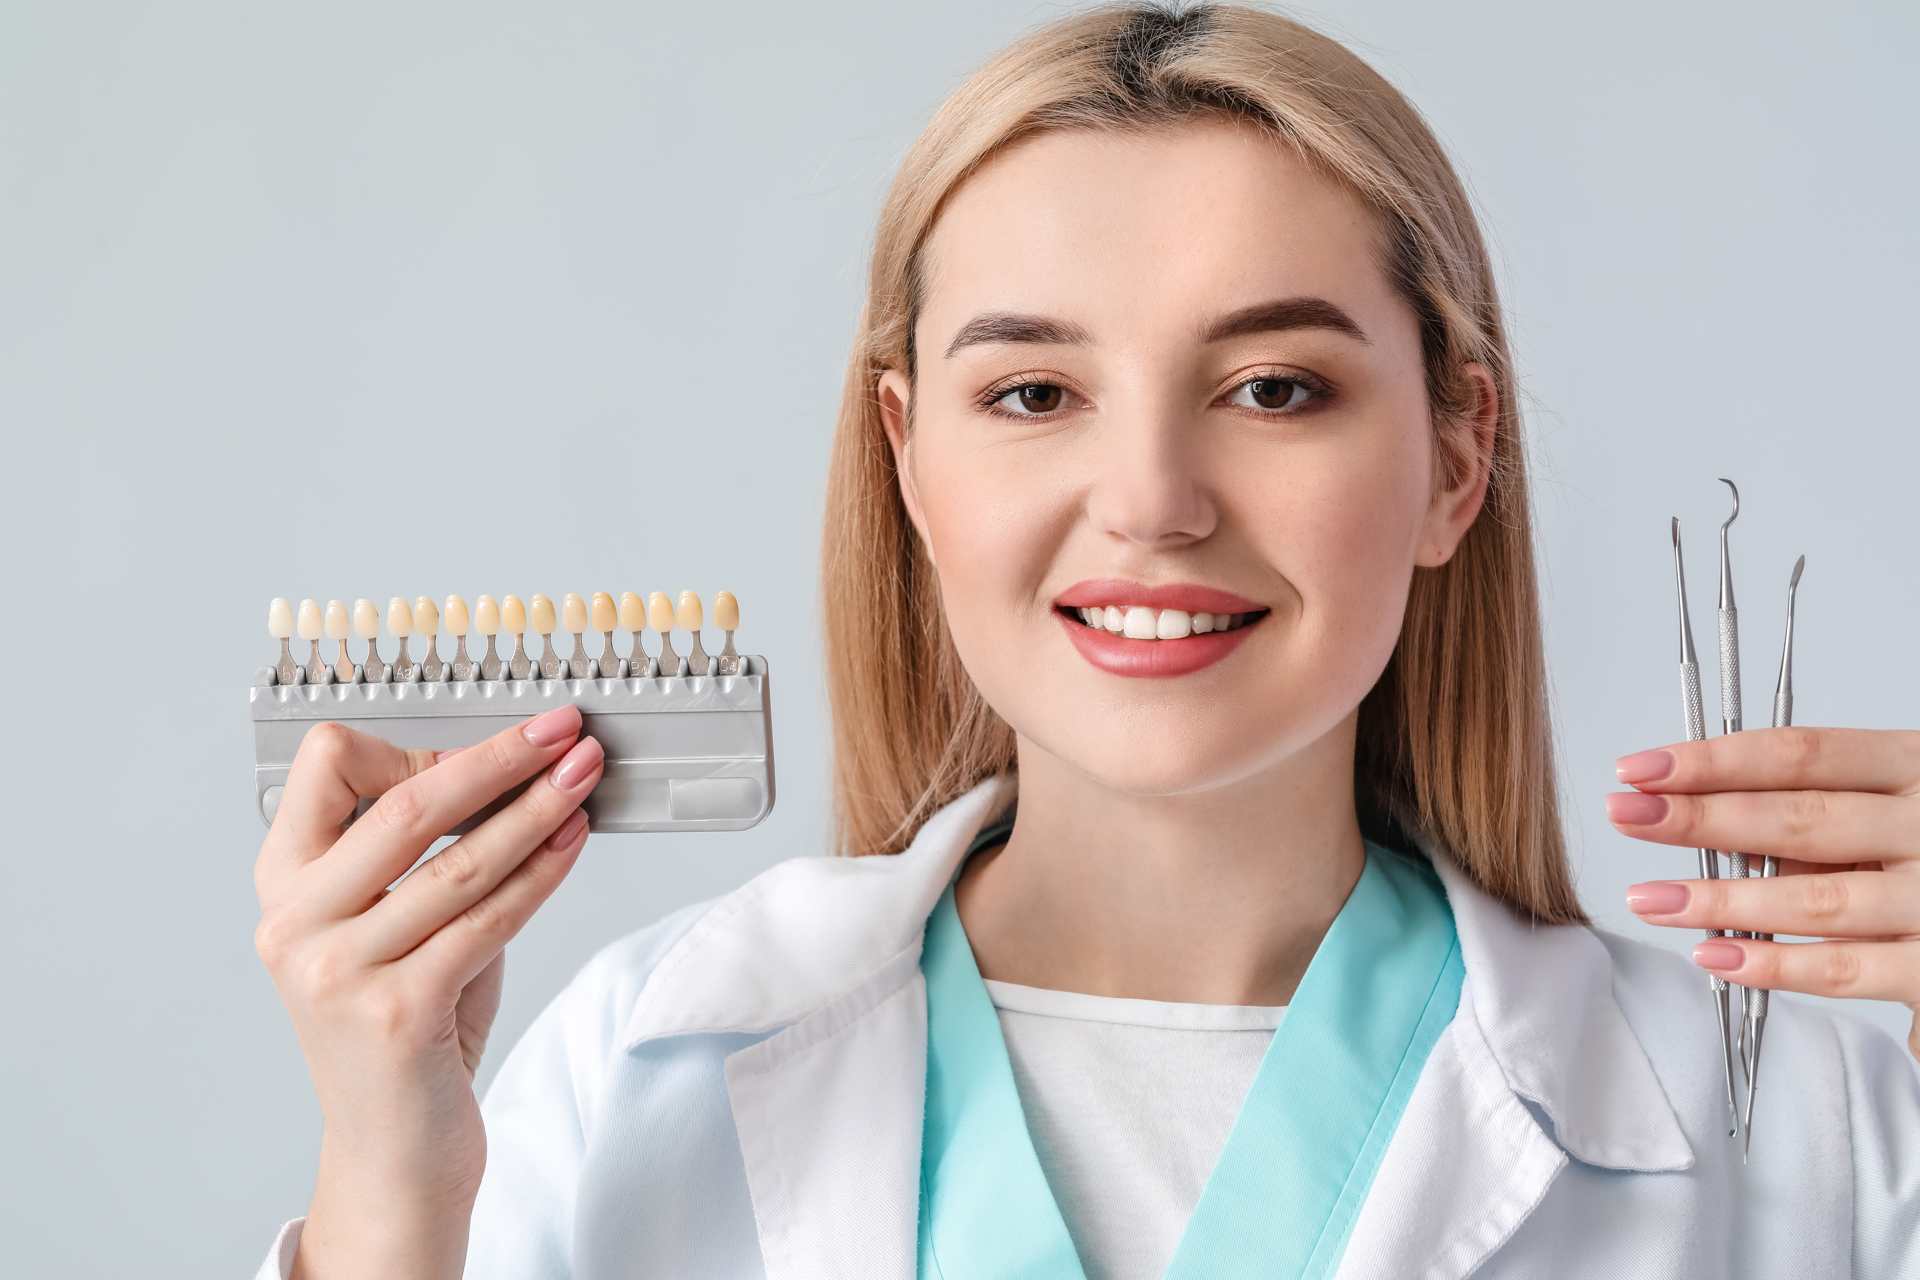 01 A young female dentist on a neutral background holding dentist tools and several tooth samples.